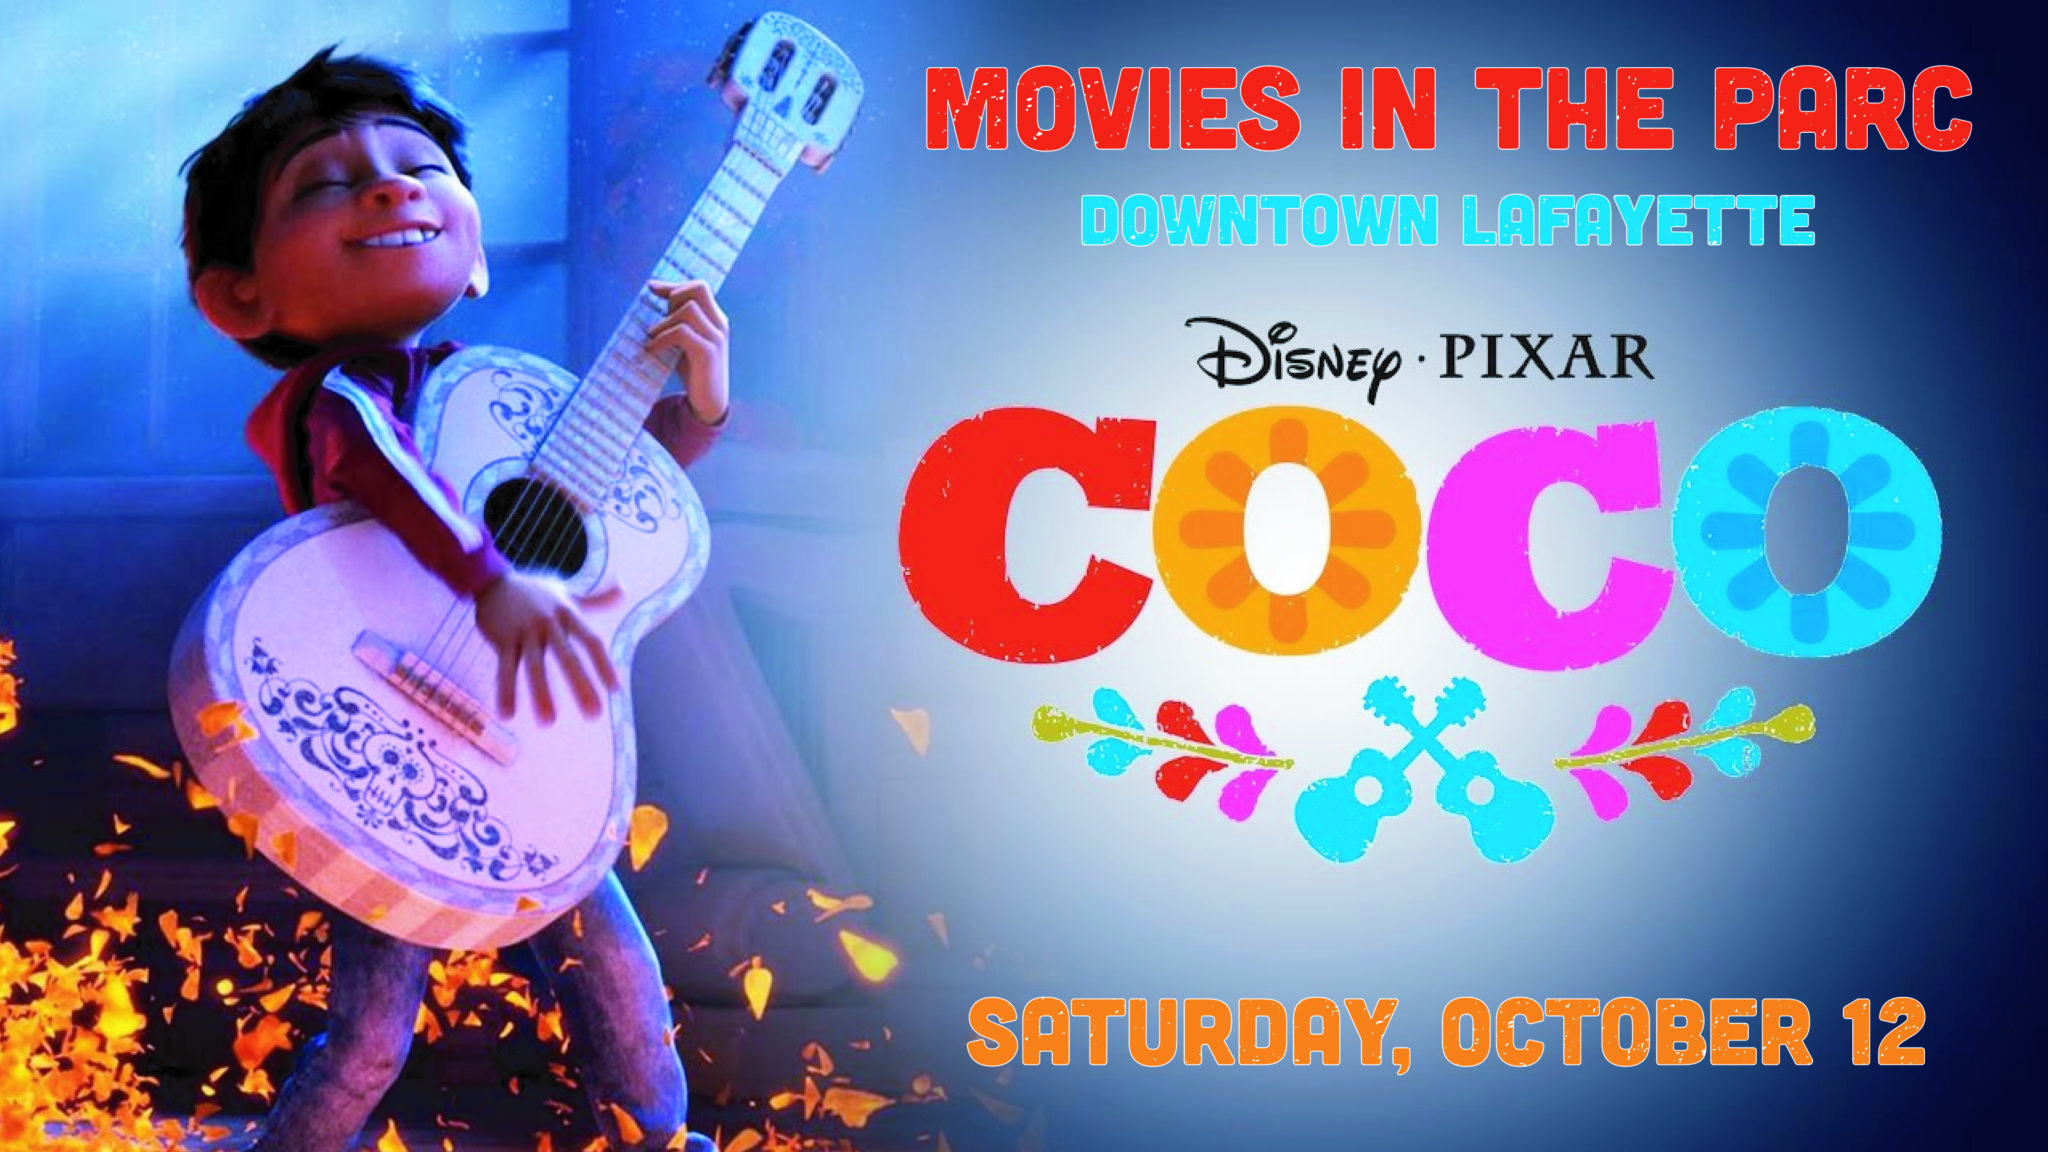 Movies in the Parc Downtown Lafayette Coco Saturday, October 12